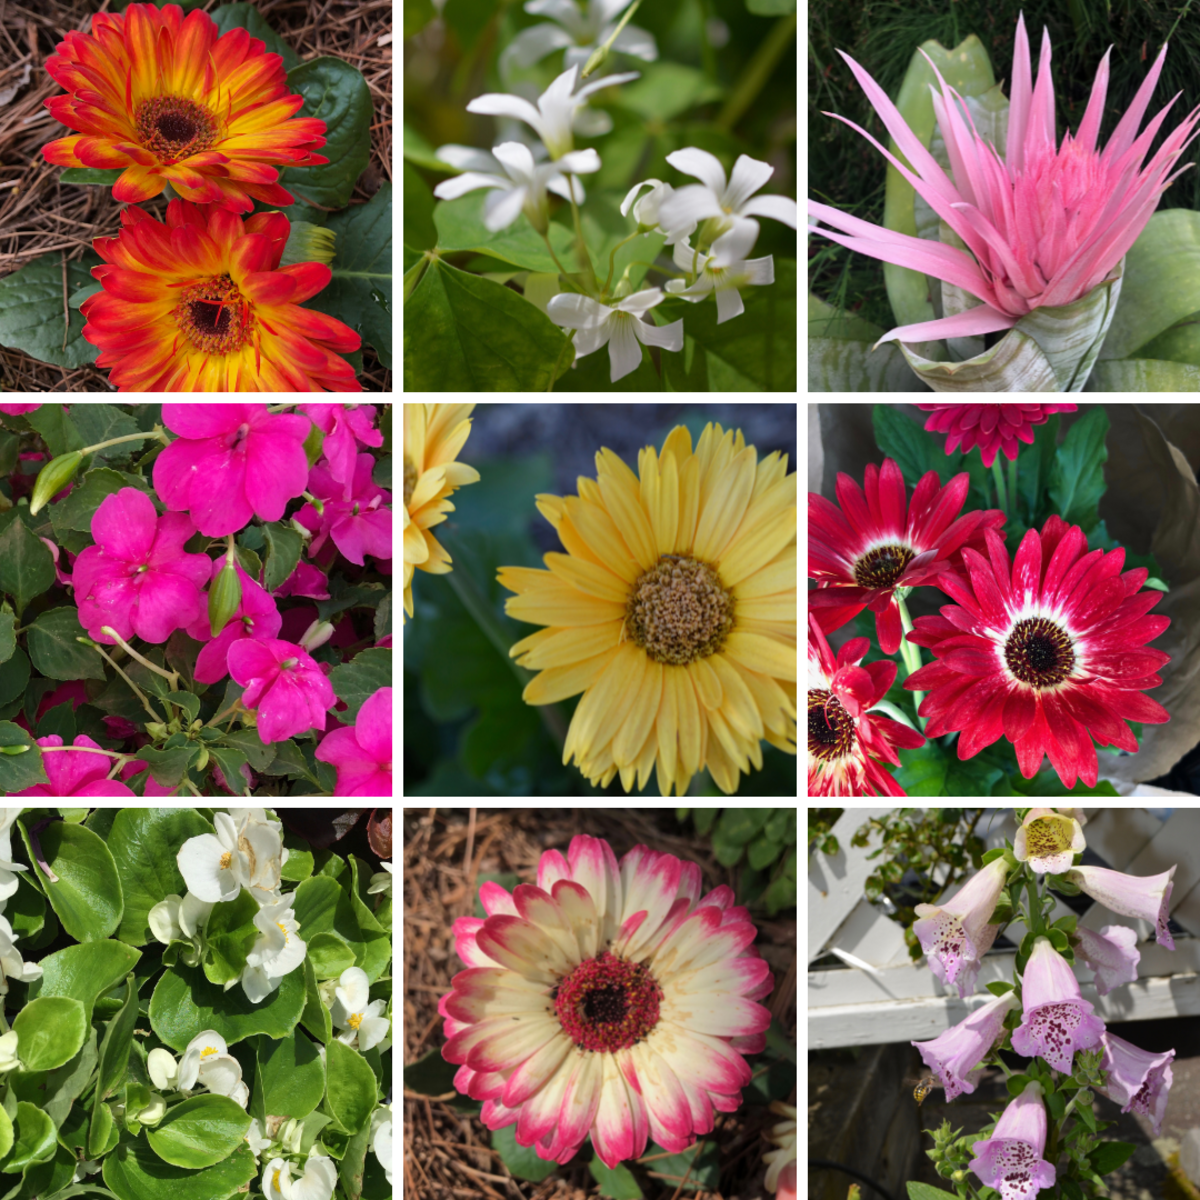 This article will take a look at great selections for flowering plants in shady gardens.